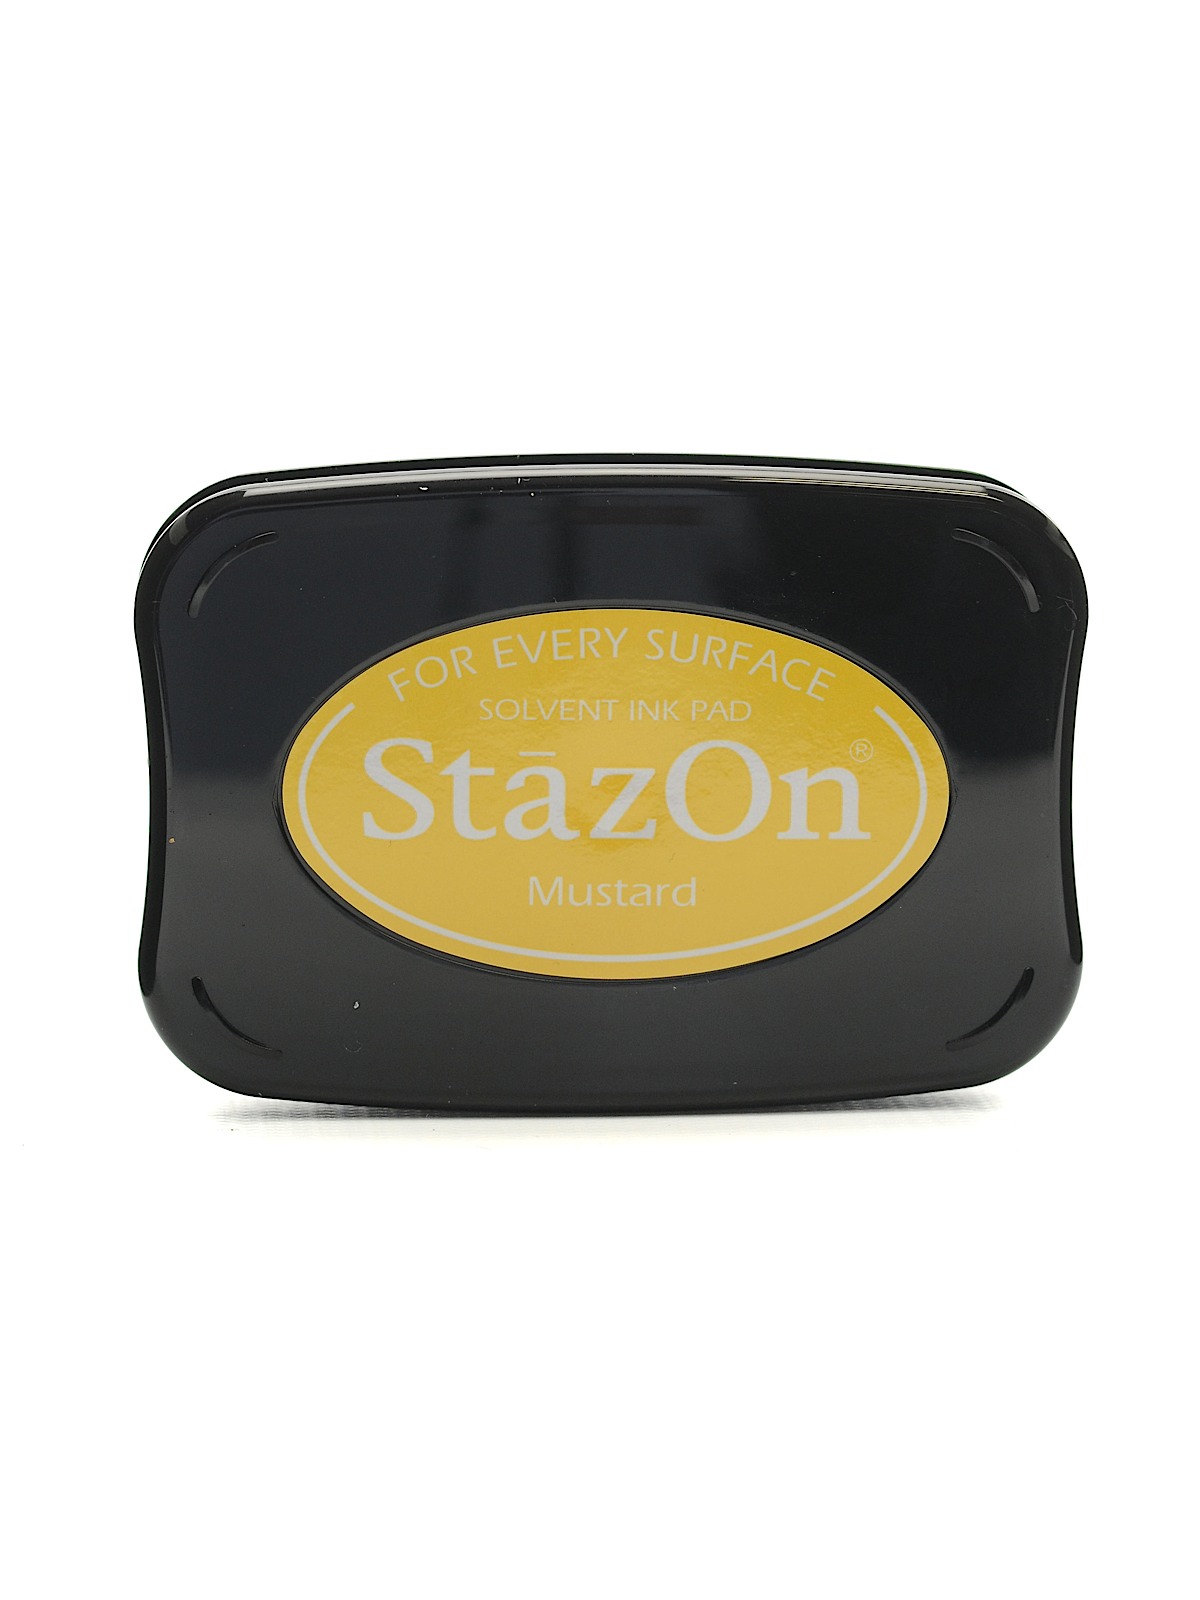 Stazon Solvent Ink Mustard 3.75 In. X 2.625 In. Full-size Pad